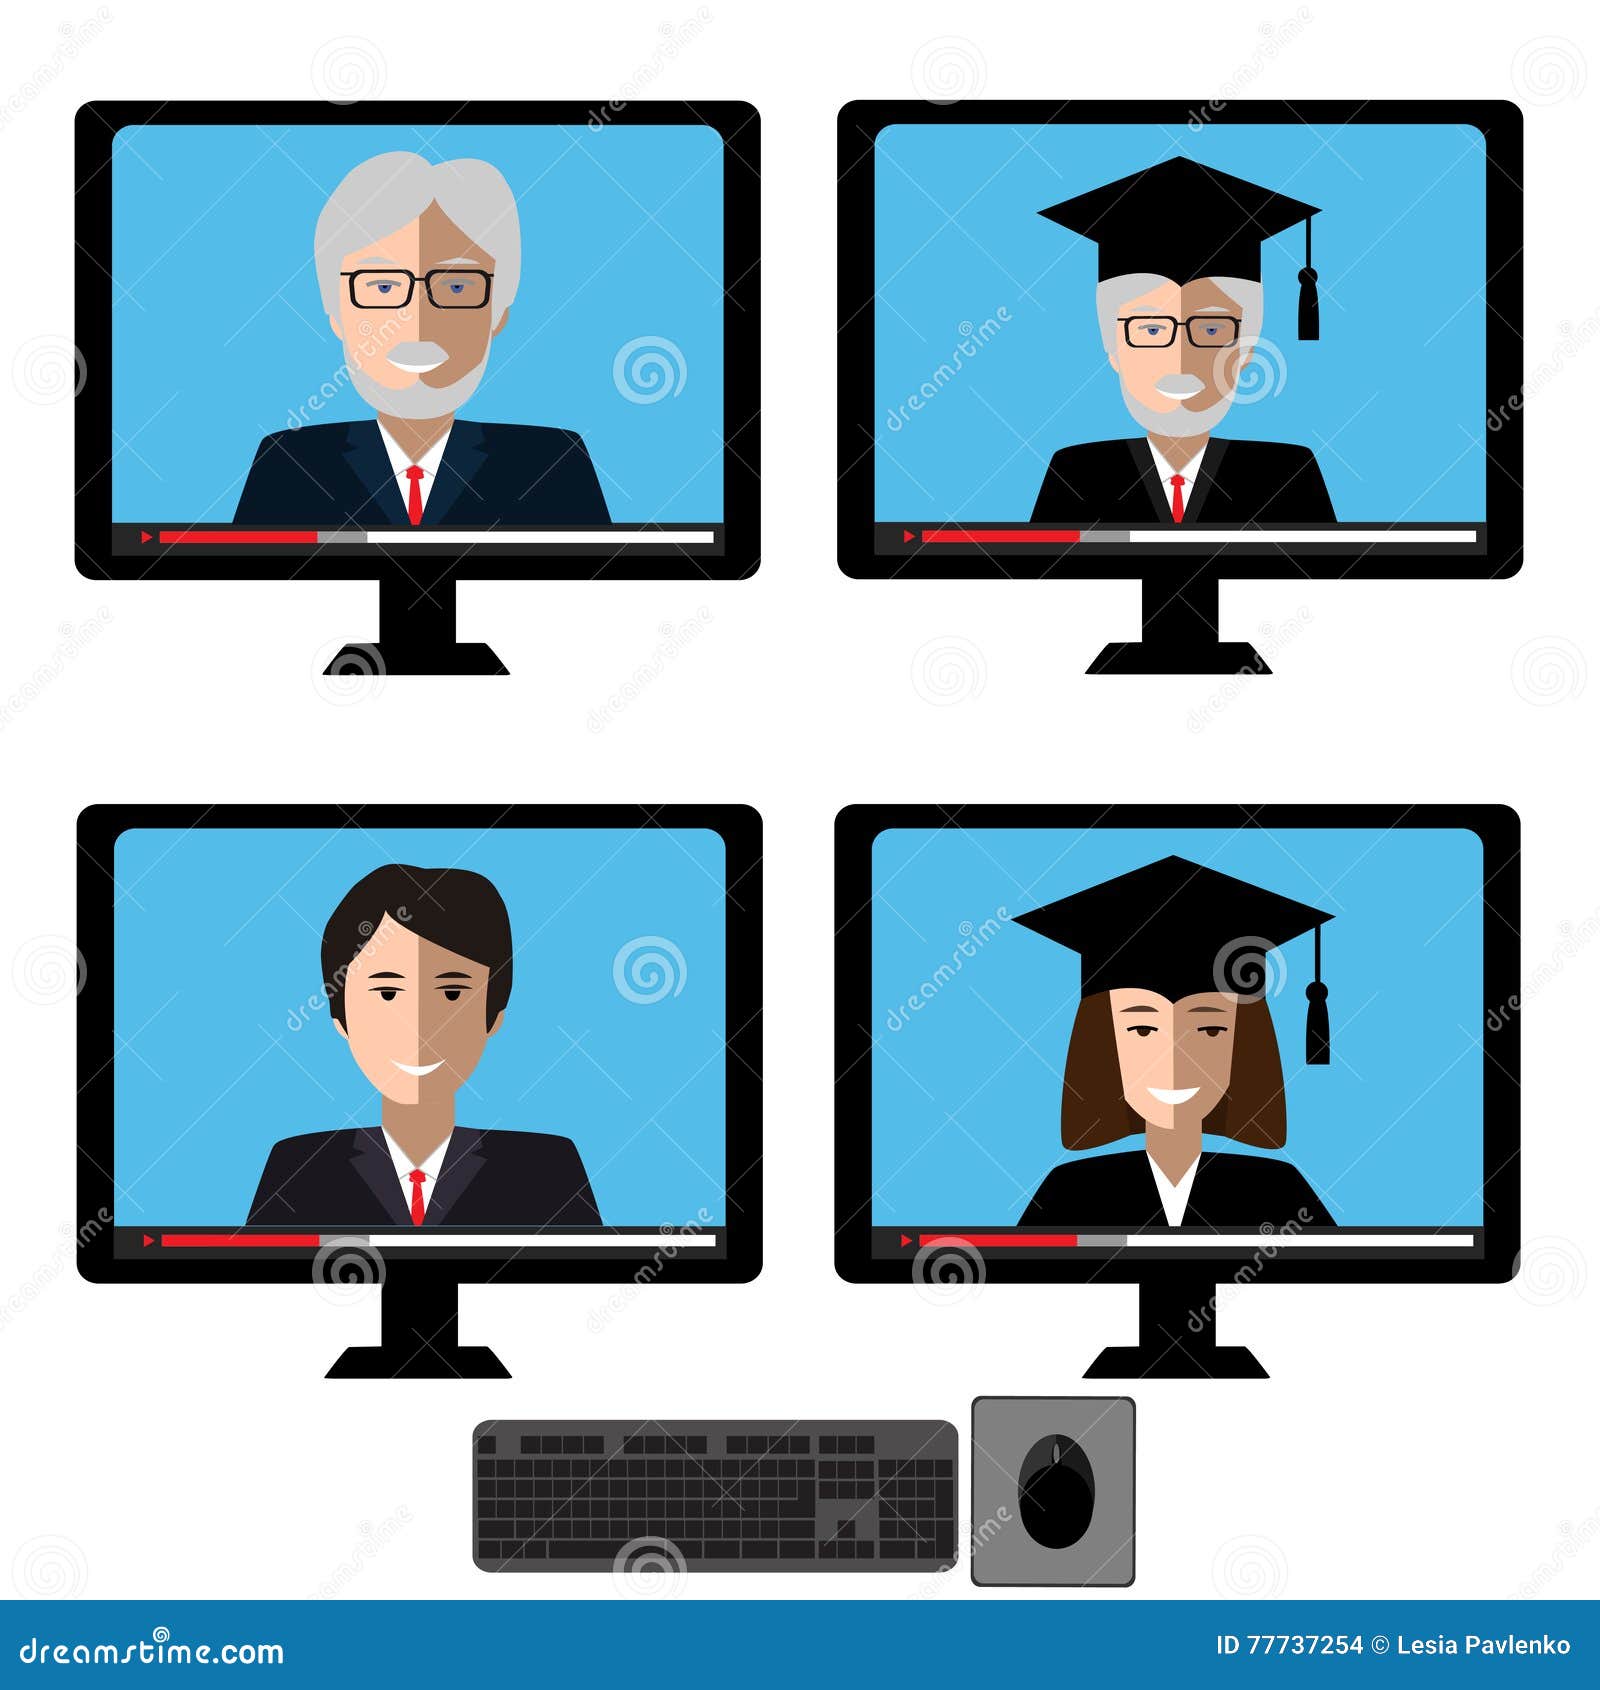  set with teachers male and female fases in computer screen.  s for business or education concept.